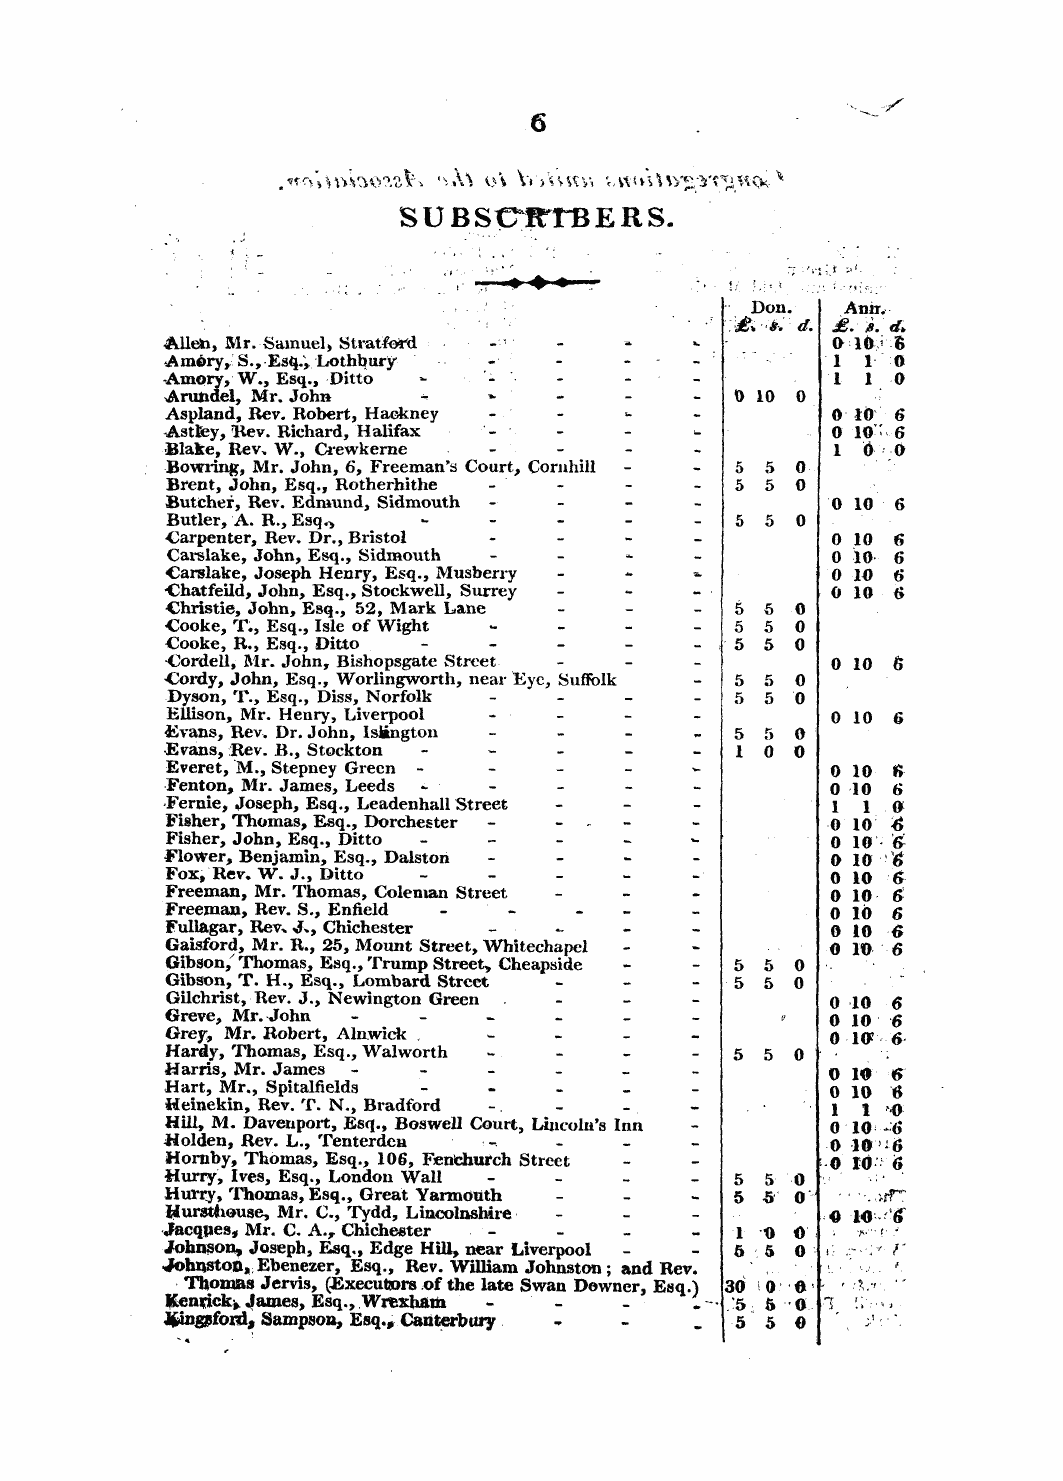 Monthly Repository (1806-1838) and Unitarian Chronicle (1832-1833): F Y, 1st edition, Supplement: 6